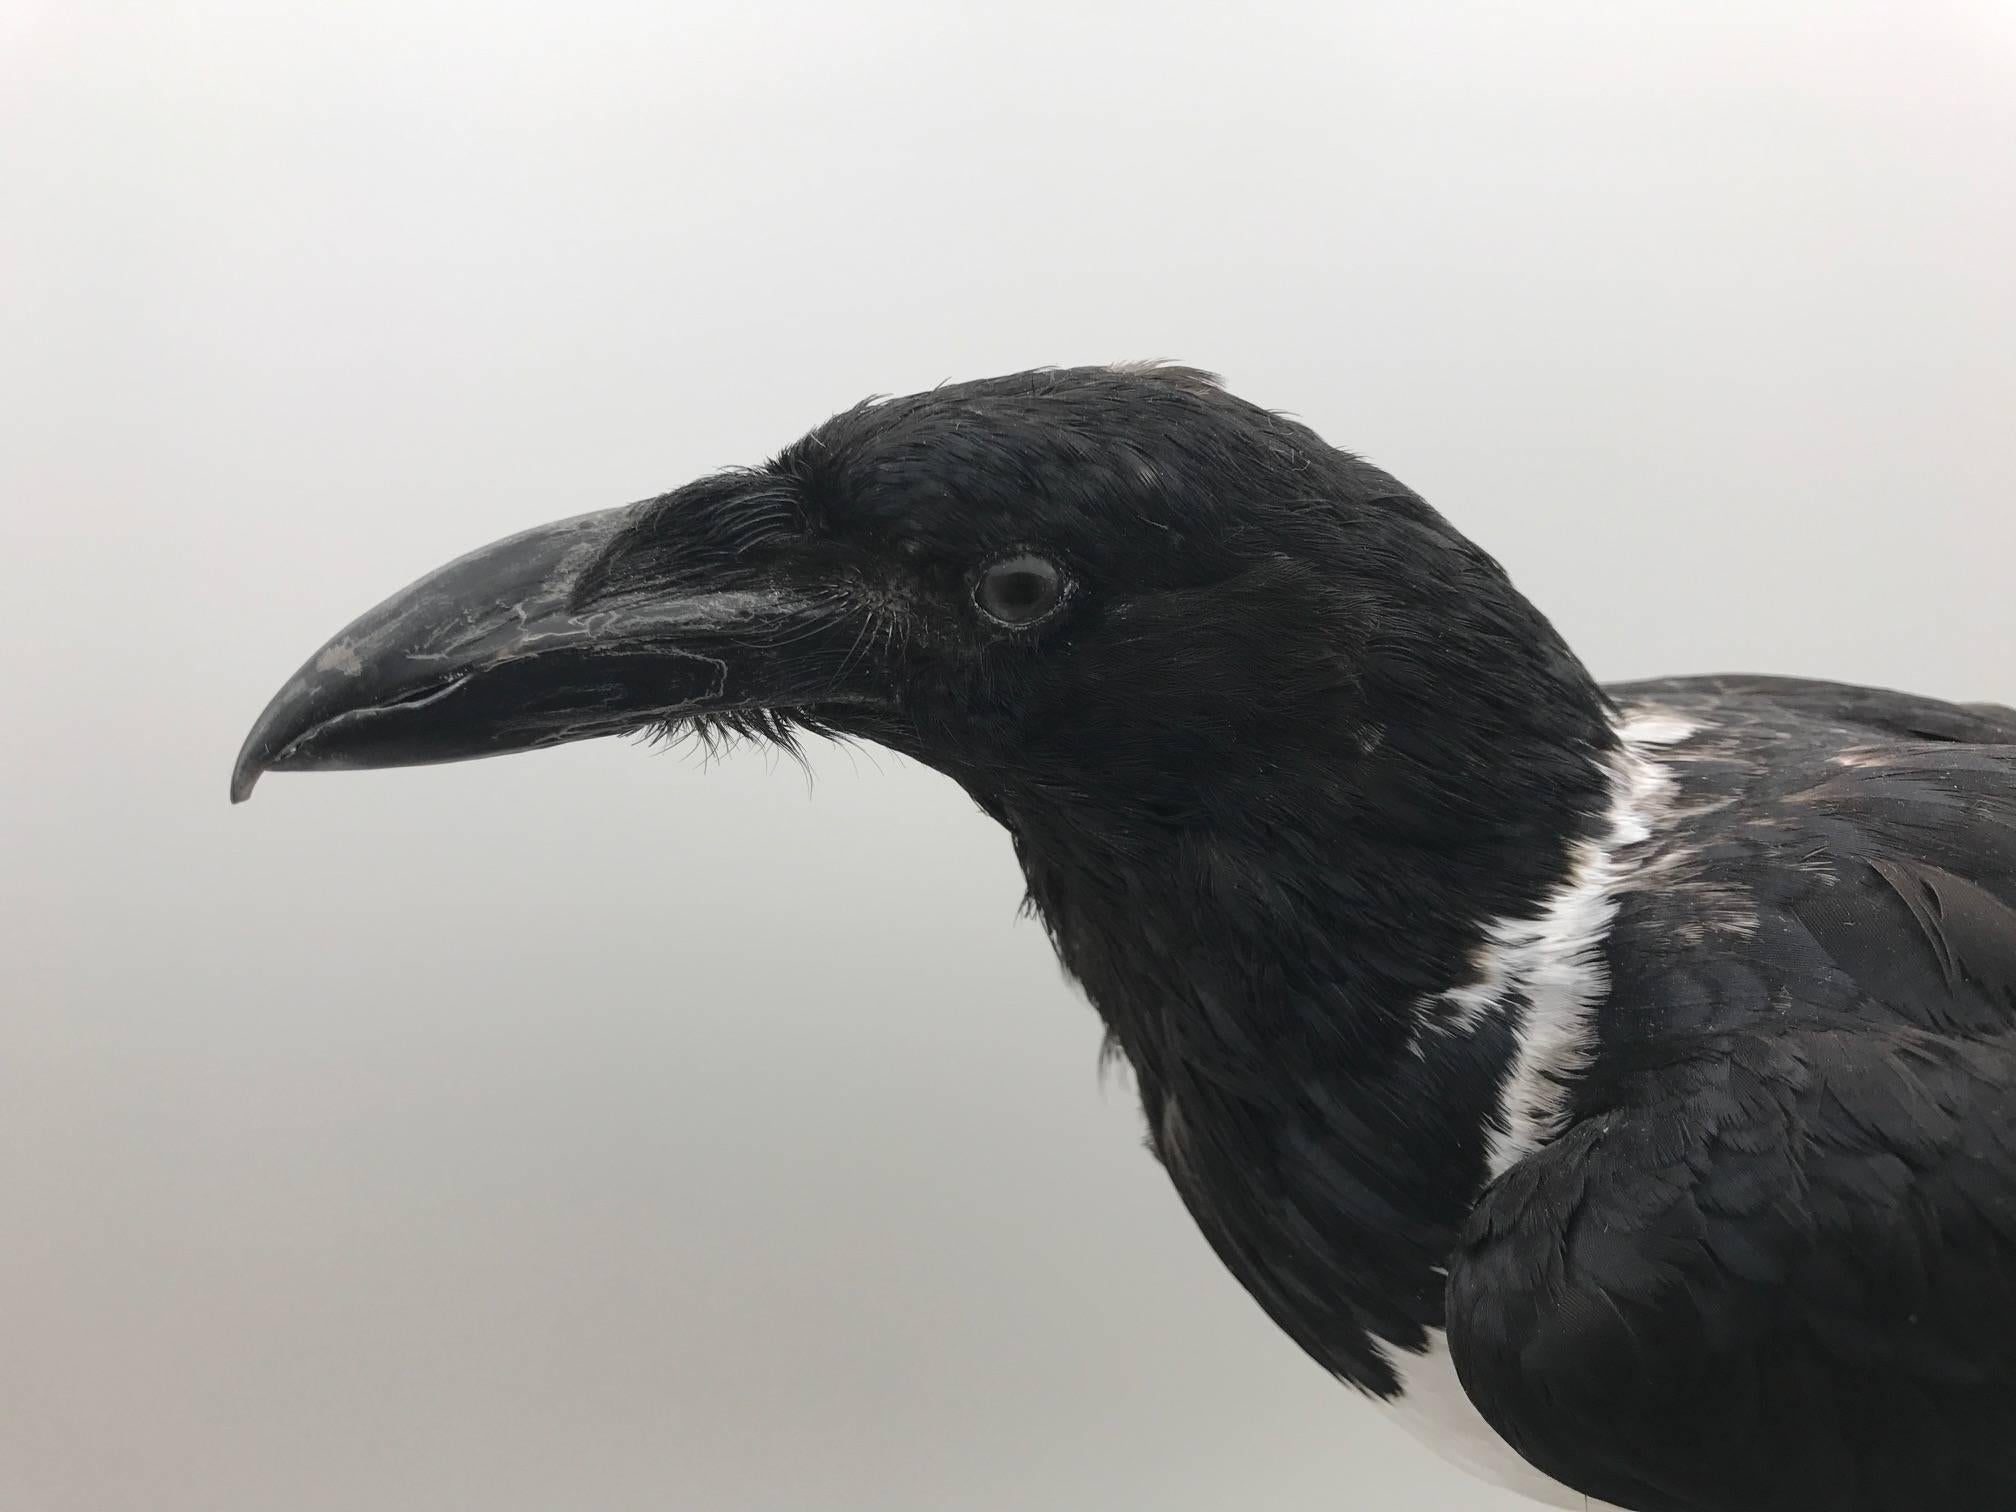 Taxidermied pied crow mounted on a wooden branch and black painted base. Pied Crow's are generally found on the continent of Africa and are sometimes referred to as a small Crow-sized Raven. This specimen is beautifully mounted and would make a